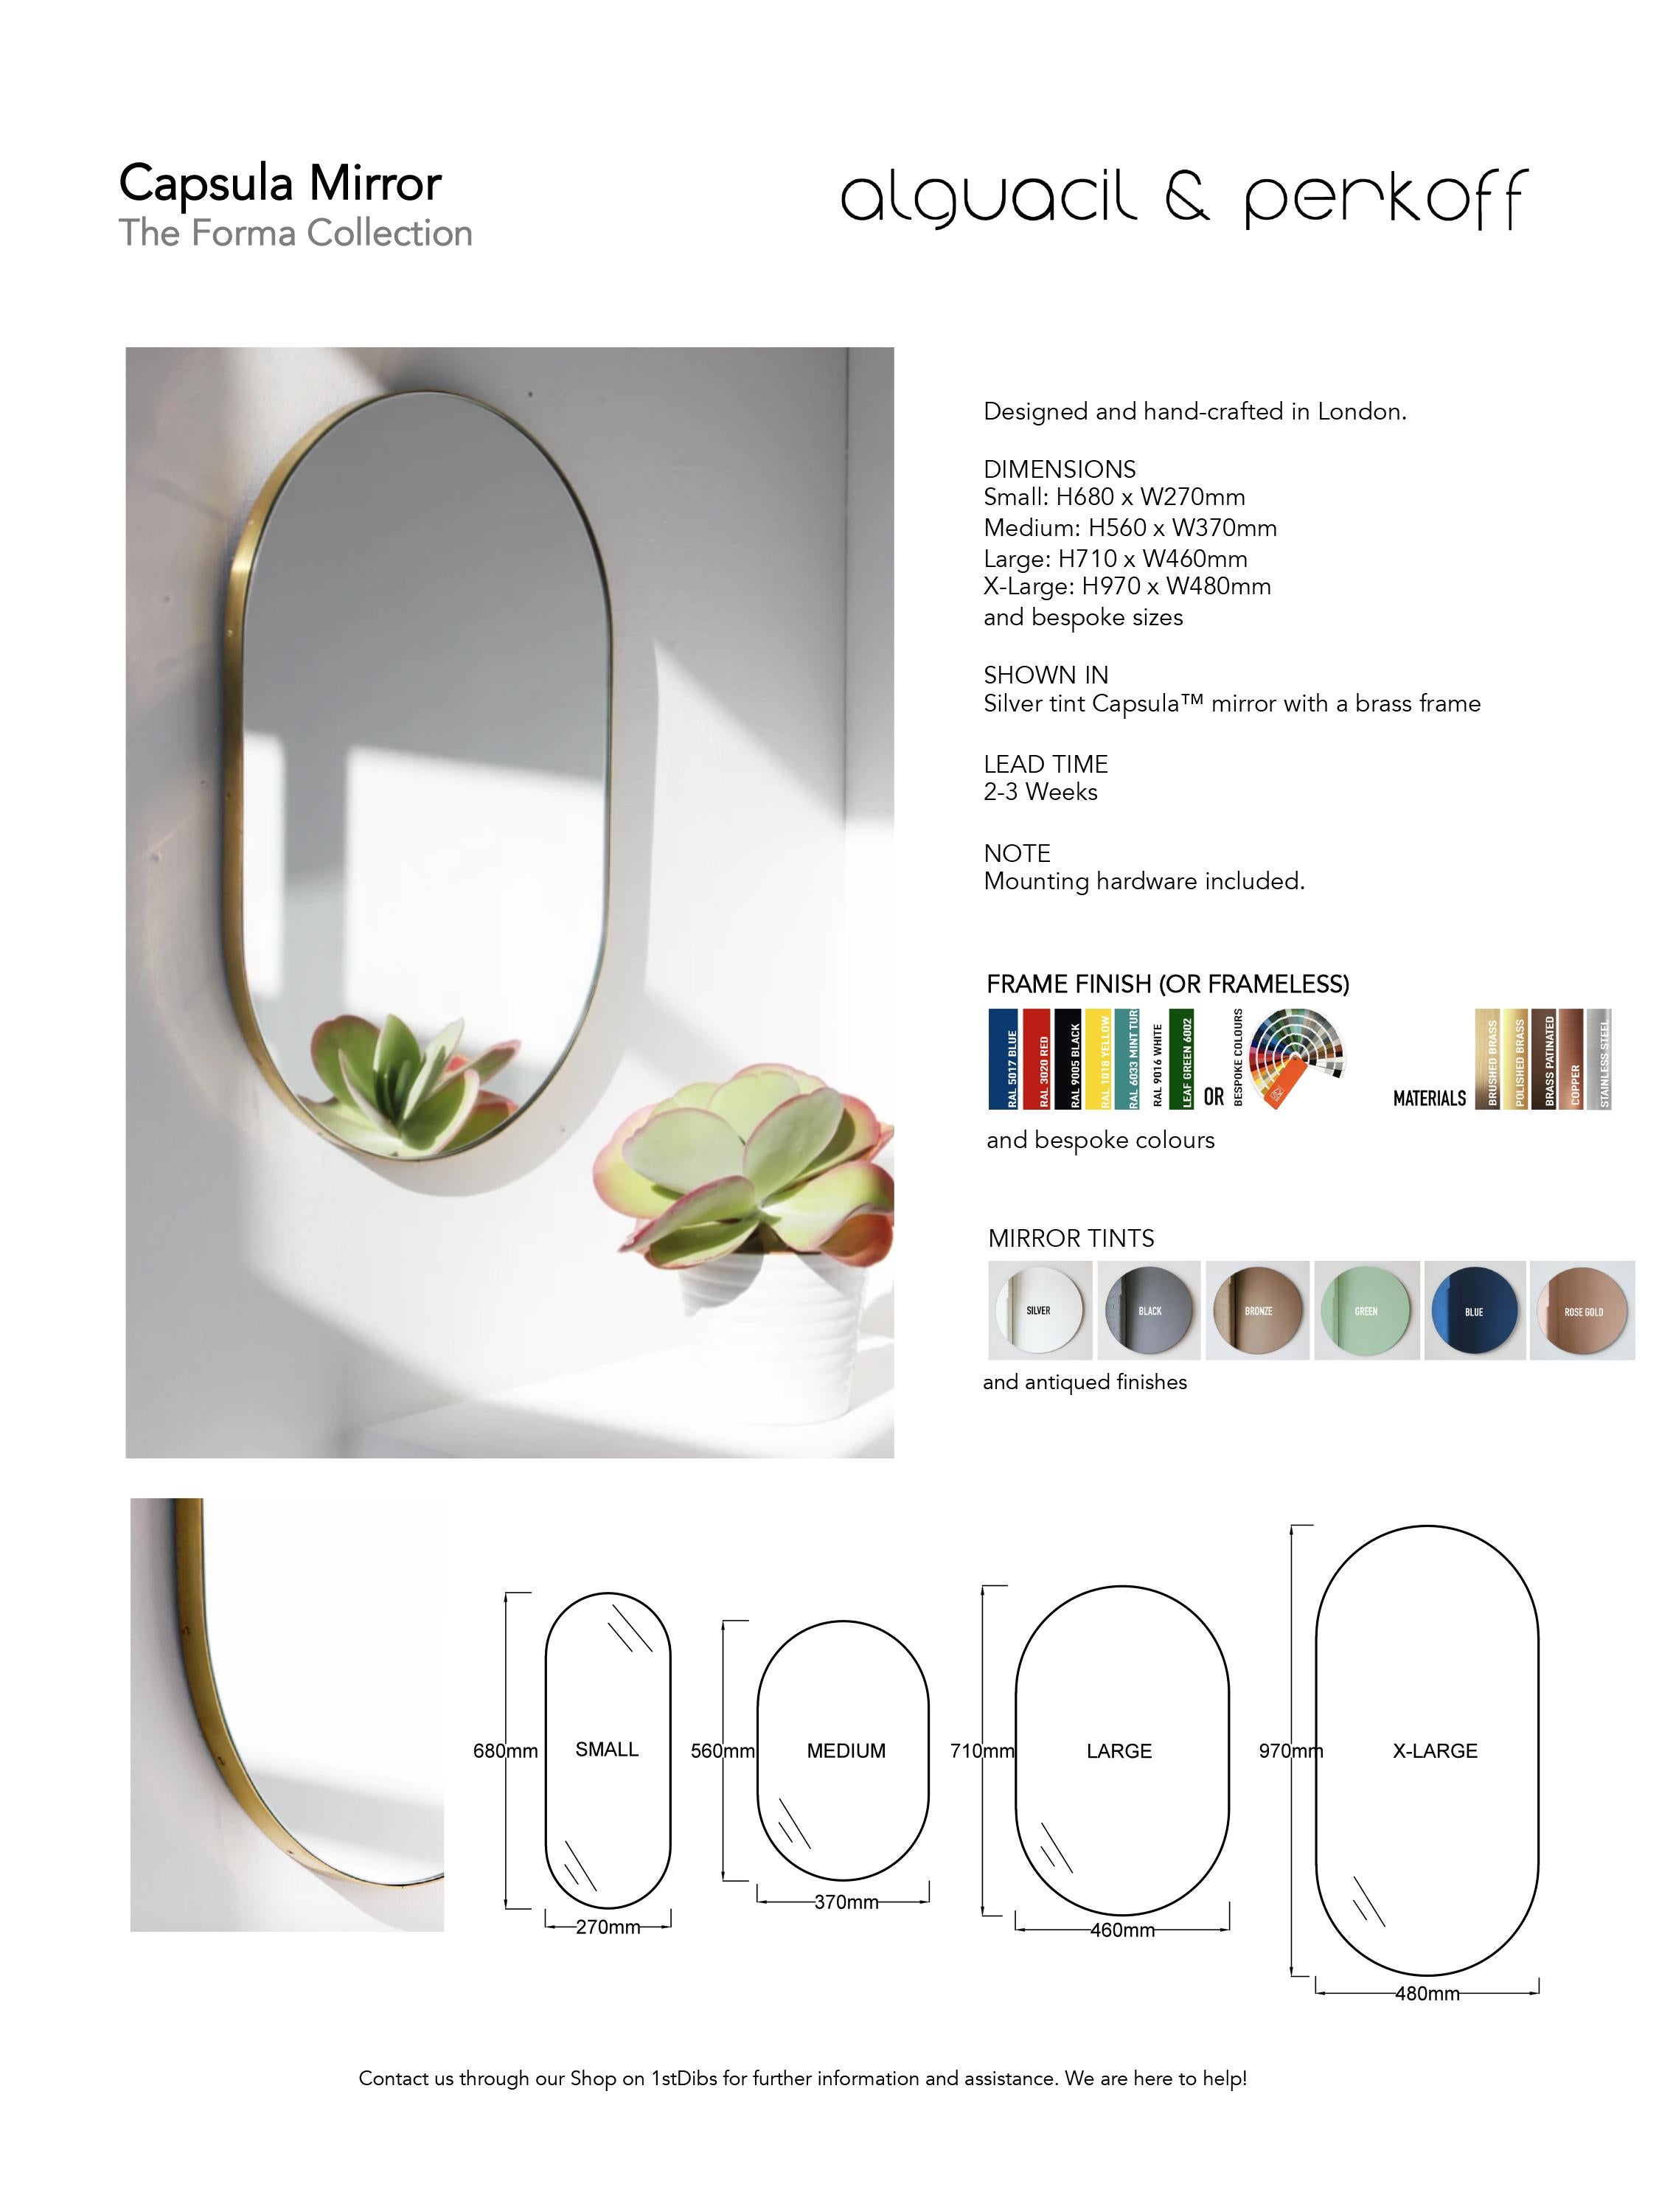 Capsula Illuminated Capsule Shaped Customisable Mirror with Brass Frame, Large For Sale 4